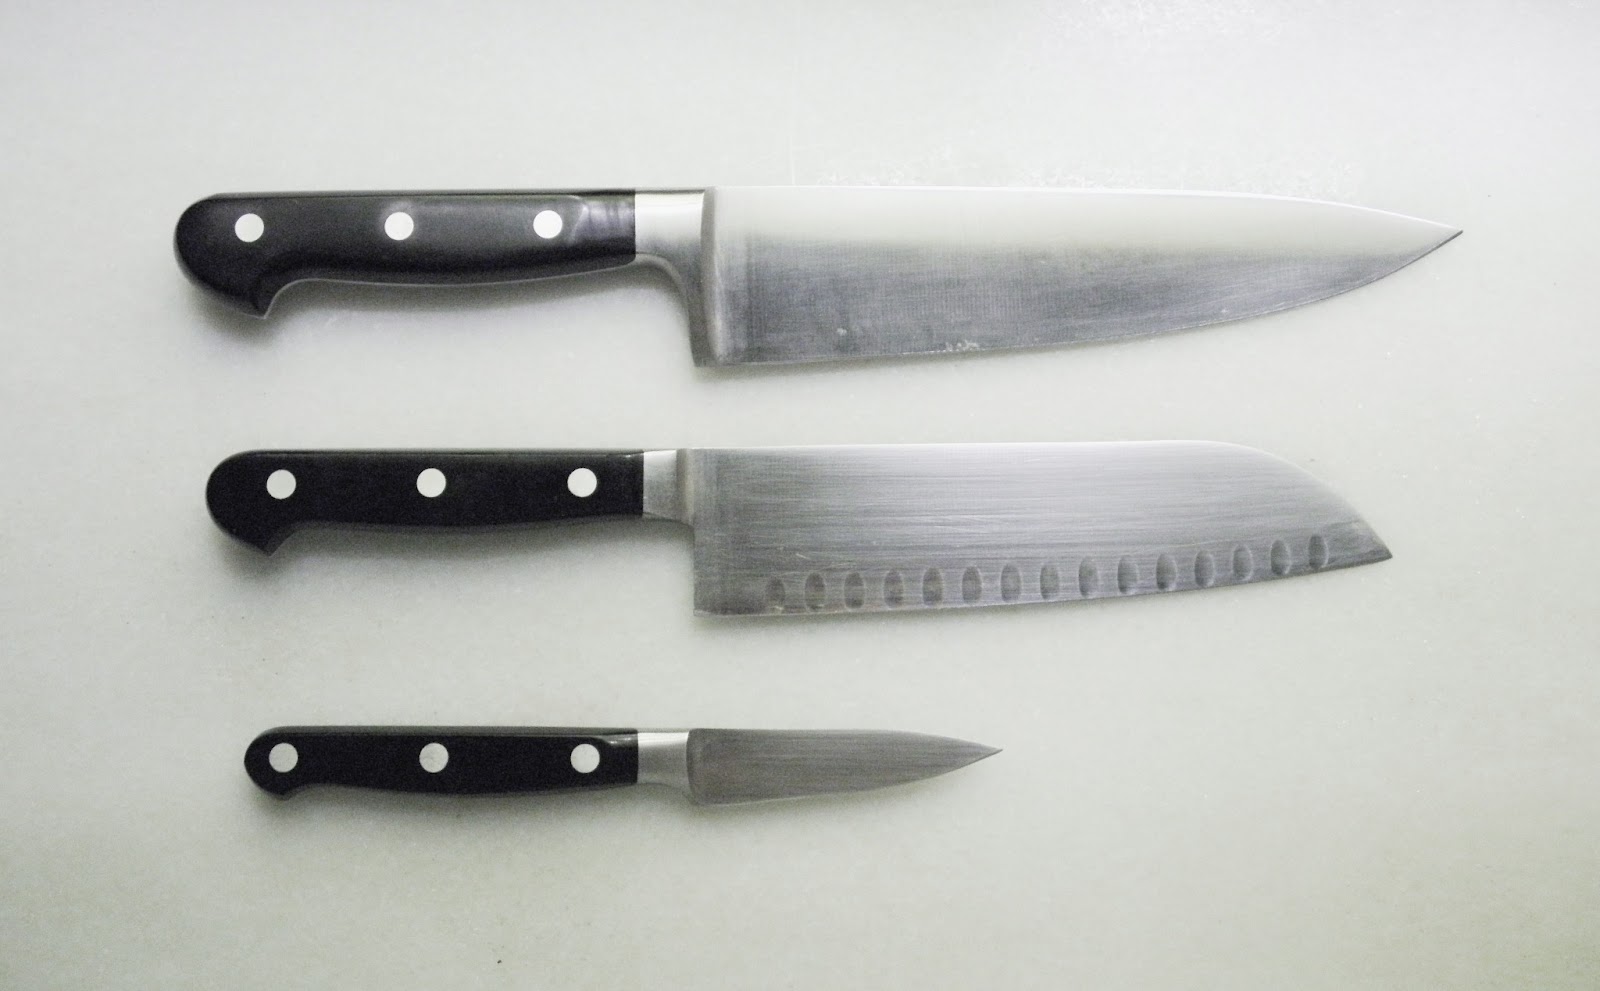 How to Use Kitchen Knives 